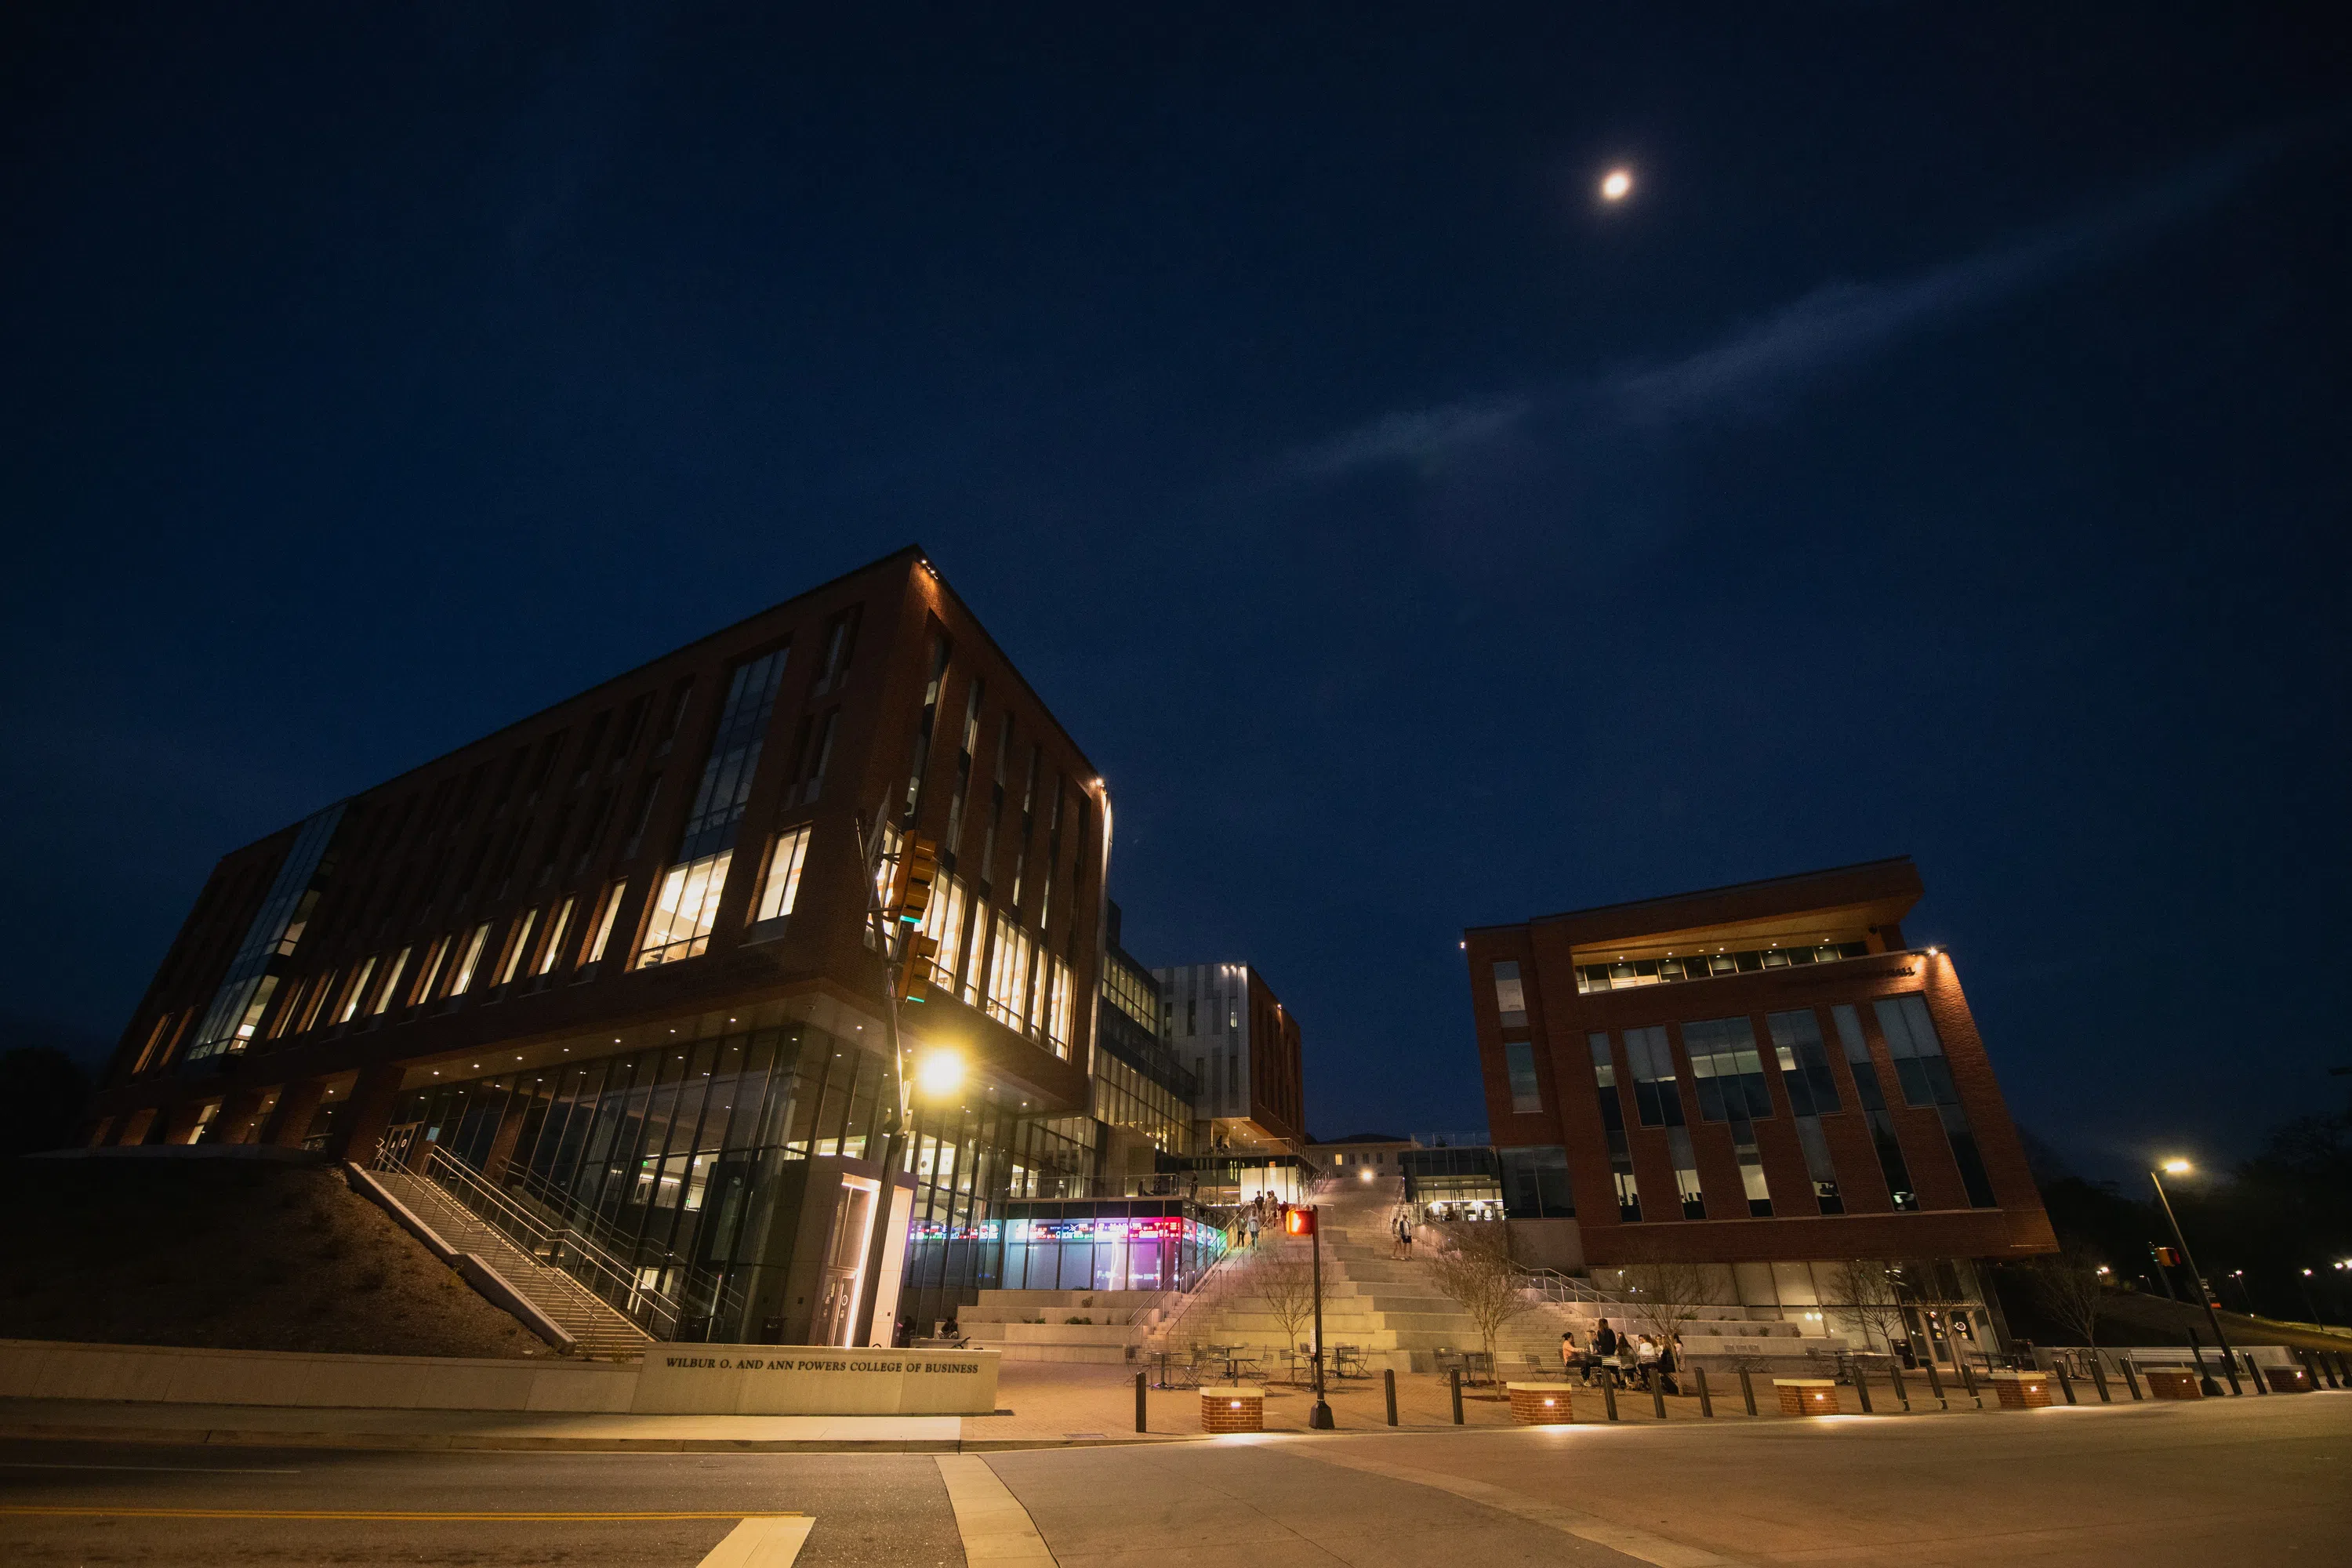 The Wilbur O. and Ann Powers College of Business at night